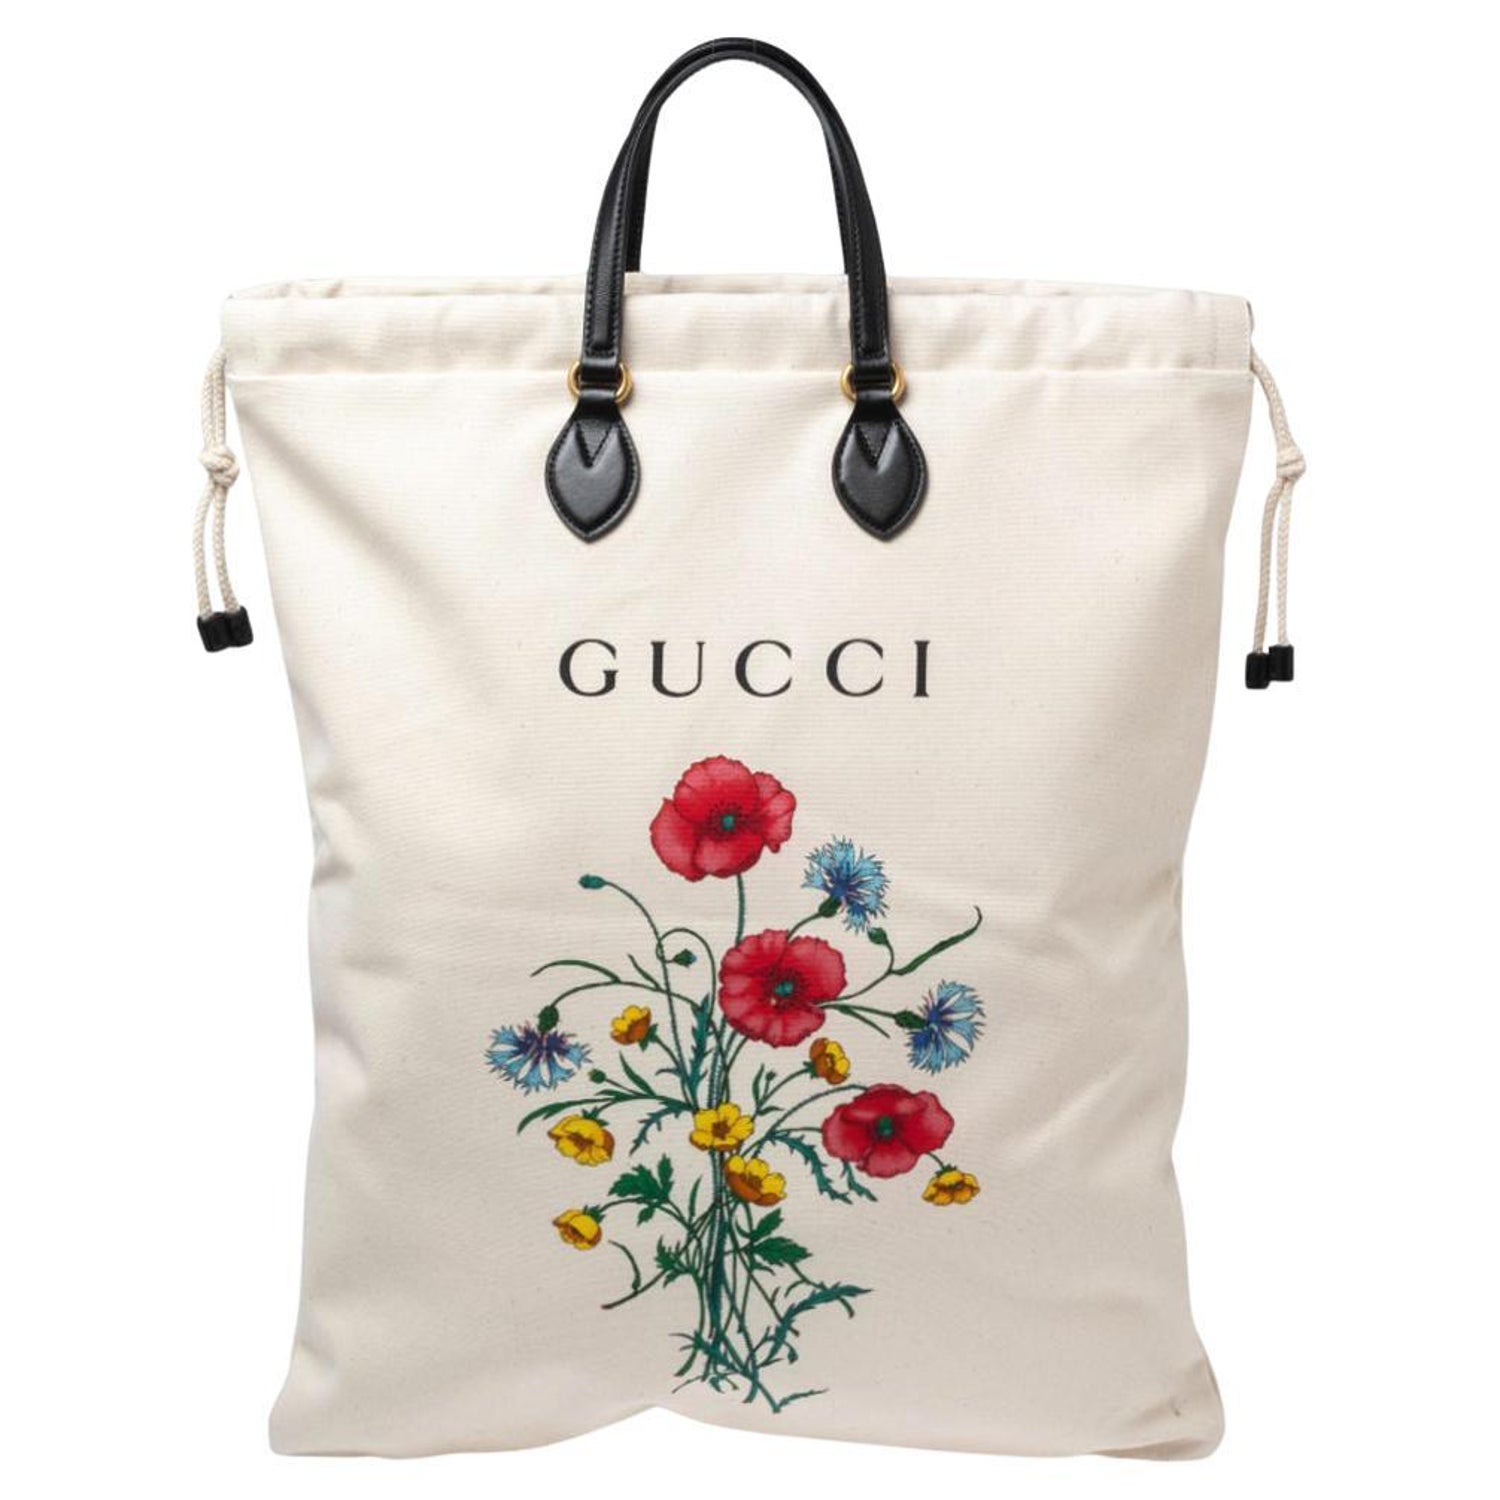 Gucci Chateau Marmont - For Sale on 1stDibs | chateau marmont gucci bag, gucci  chateau marmont bag, gucci chateau marmont laundry bag